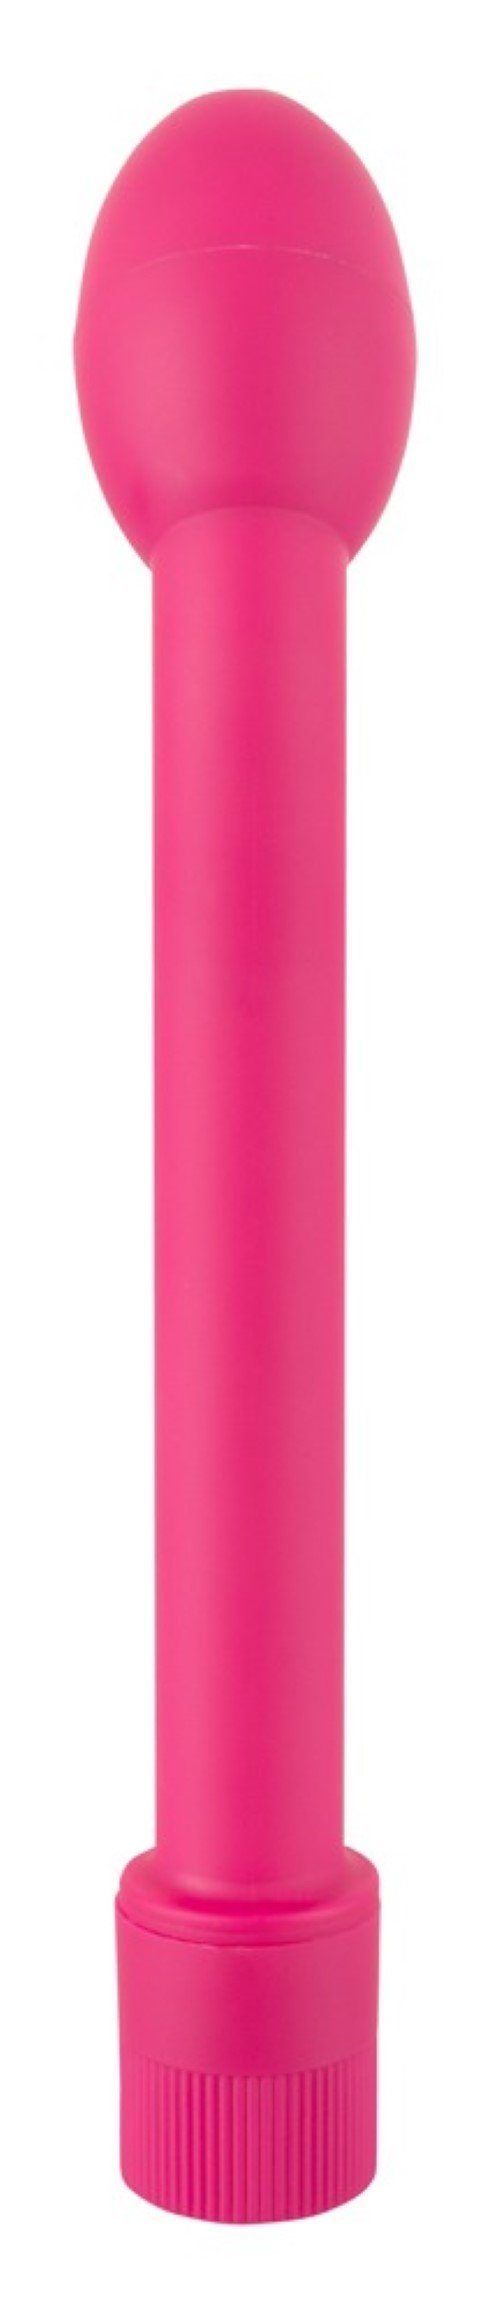 G-Punkt-Vibrator - You2Toys High Pink Times You2Toys Speed Good